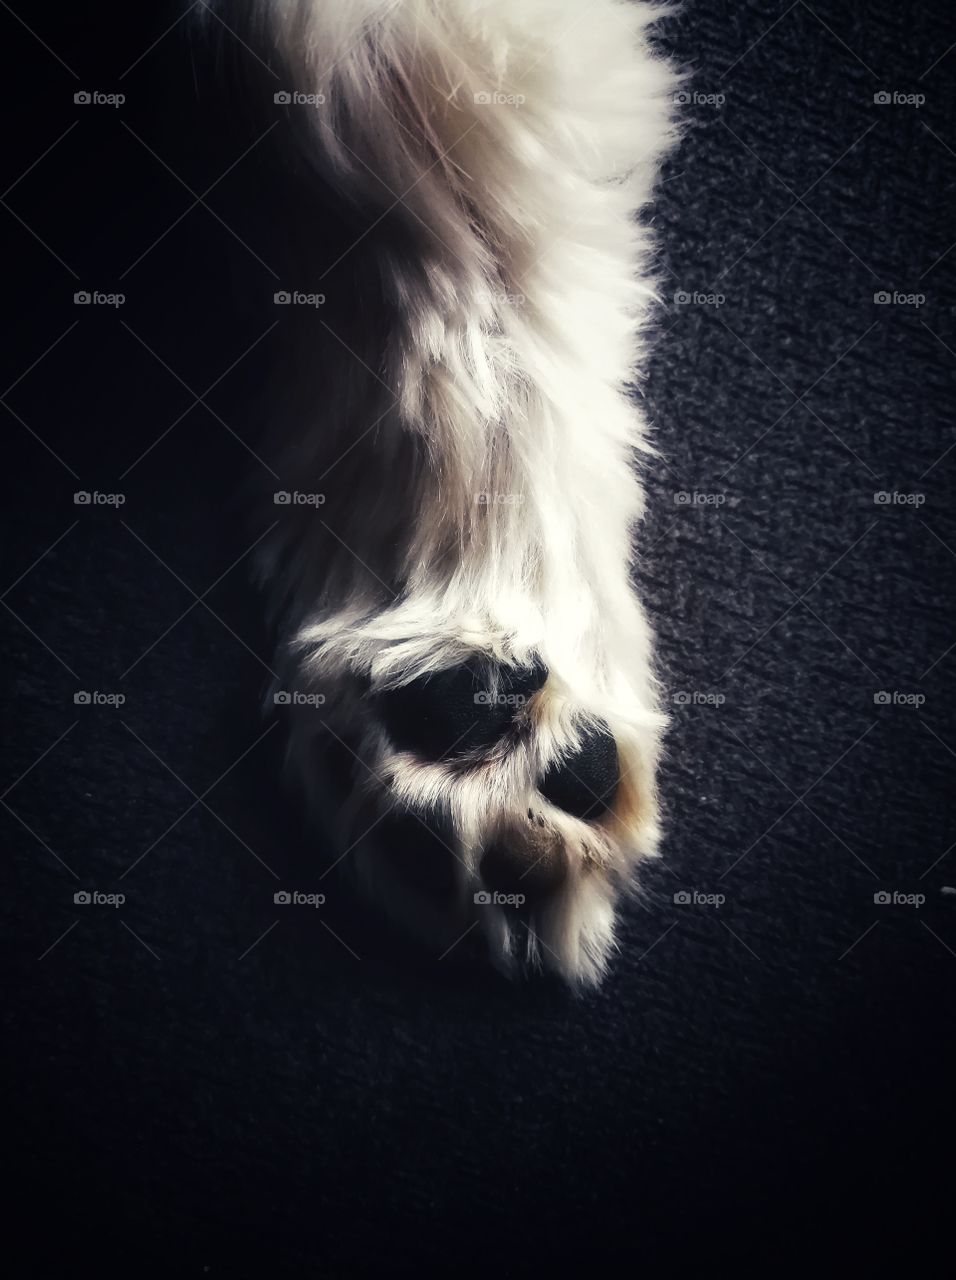 Dogs paw with white fur